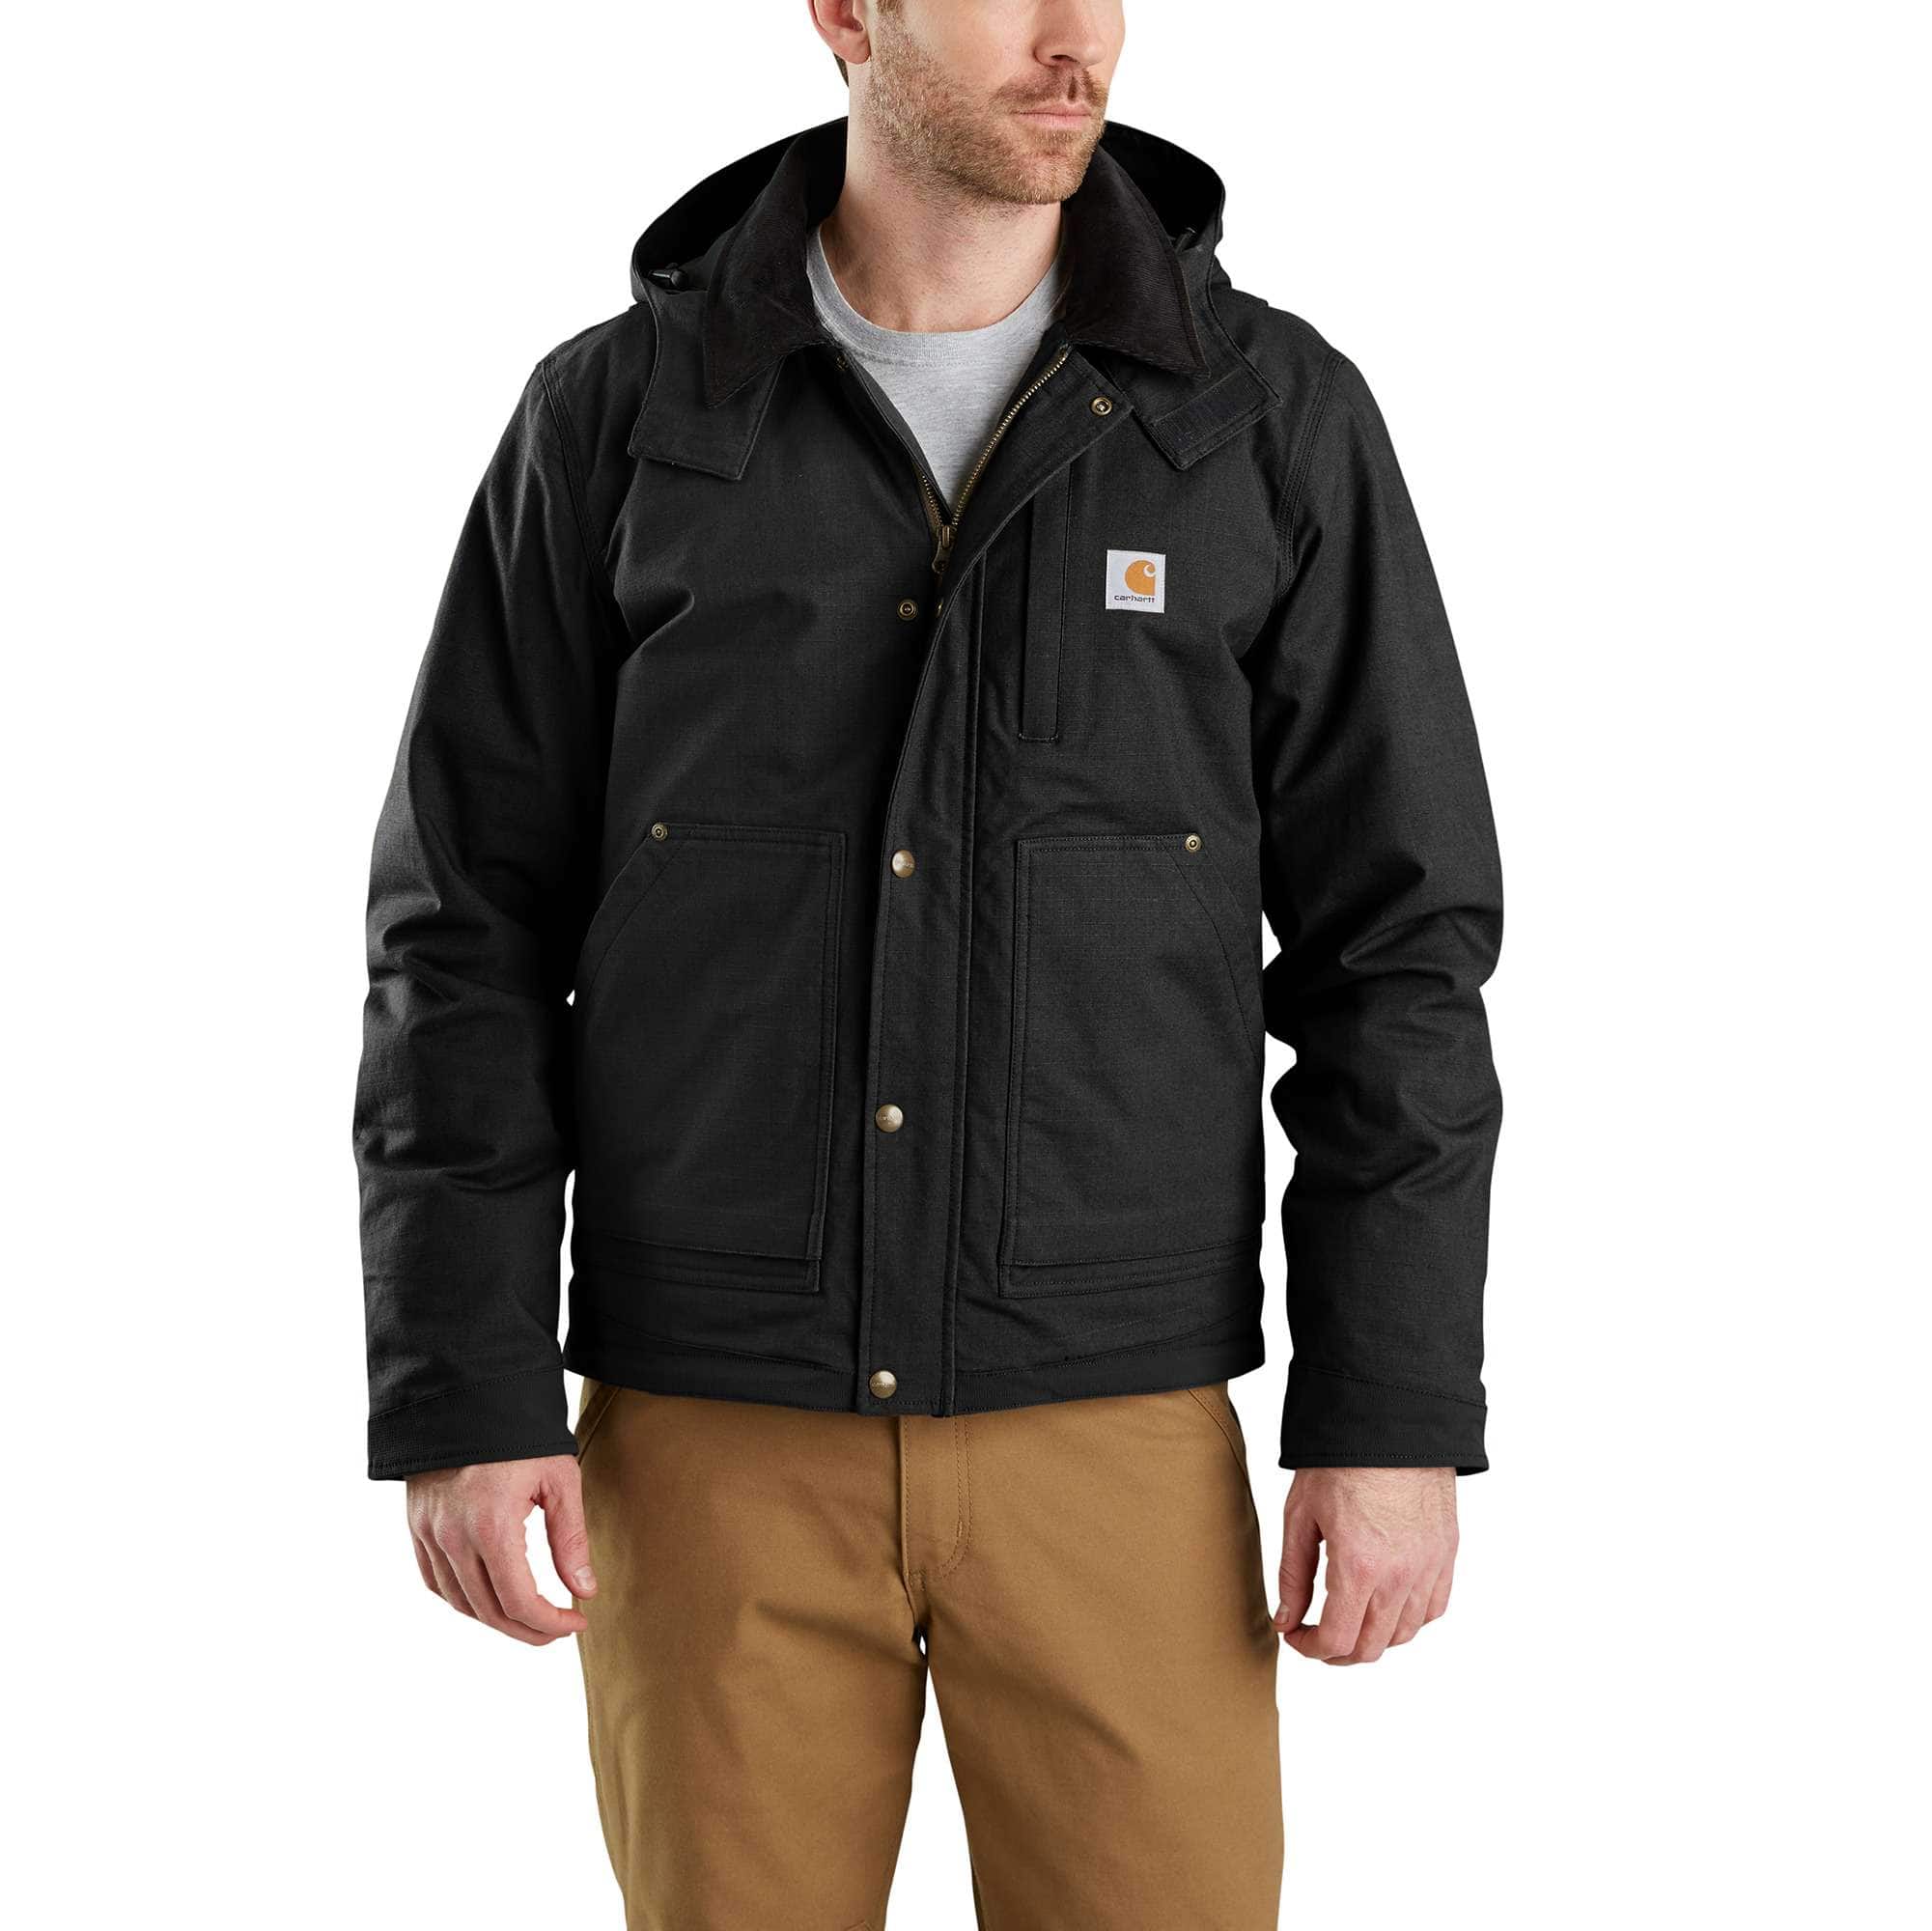 Full Swing® Relaxed Fit Ripstop Insulated Jacket - 3 Warmest Rating